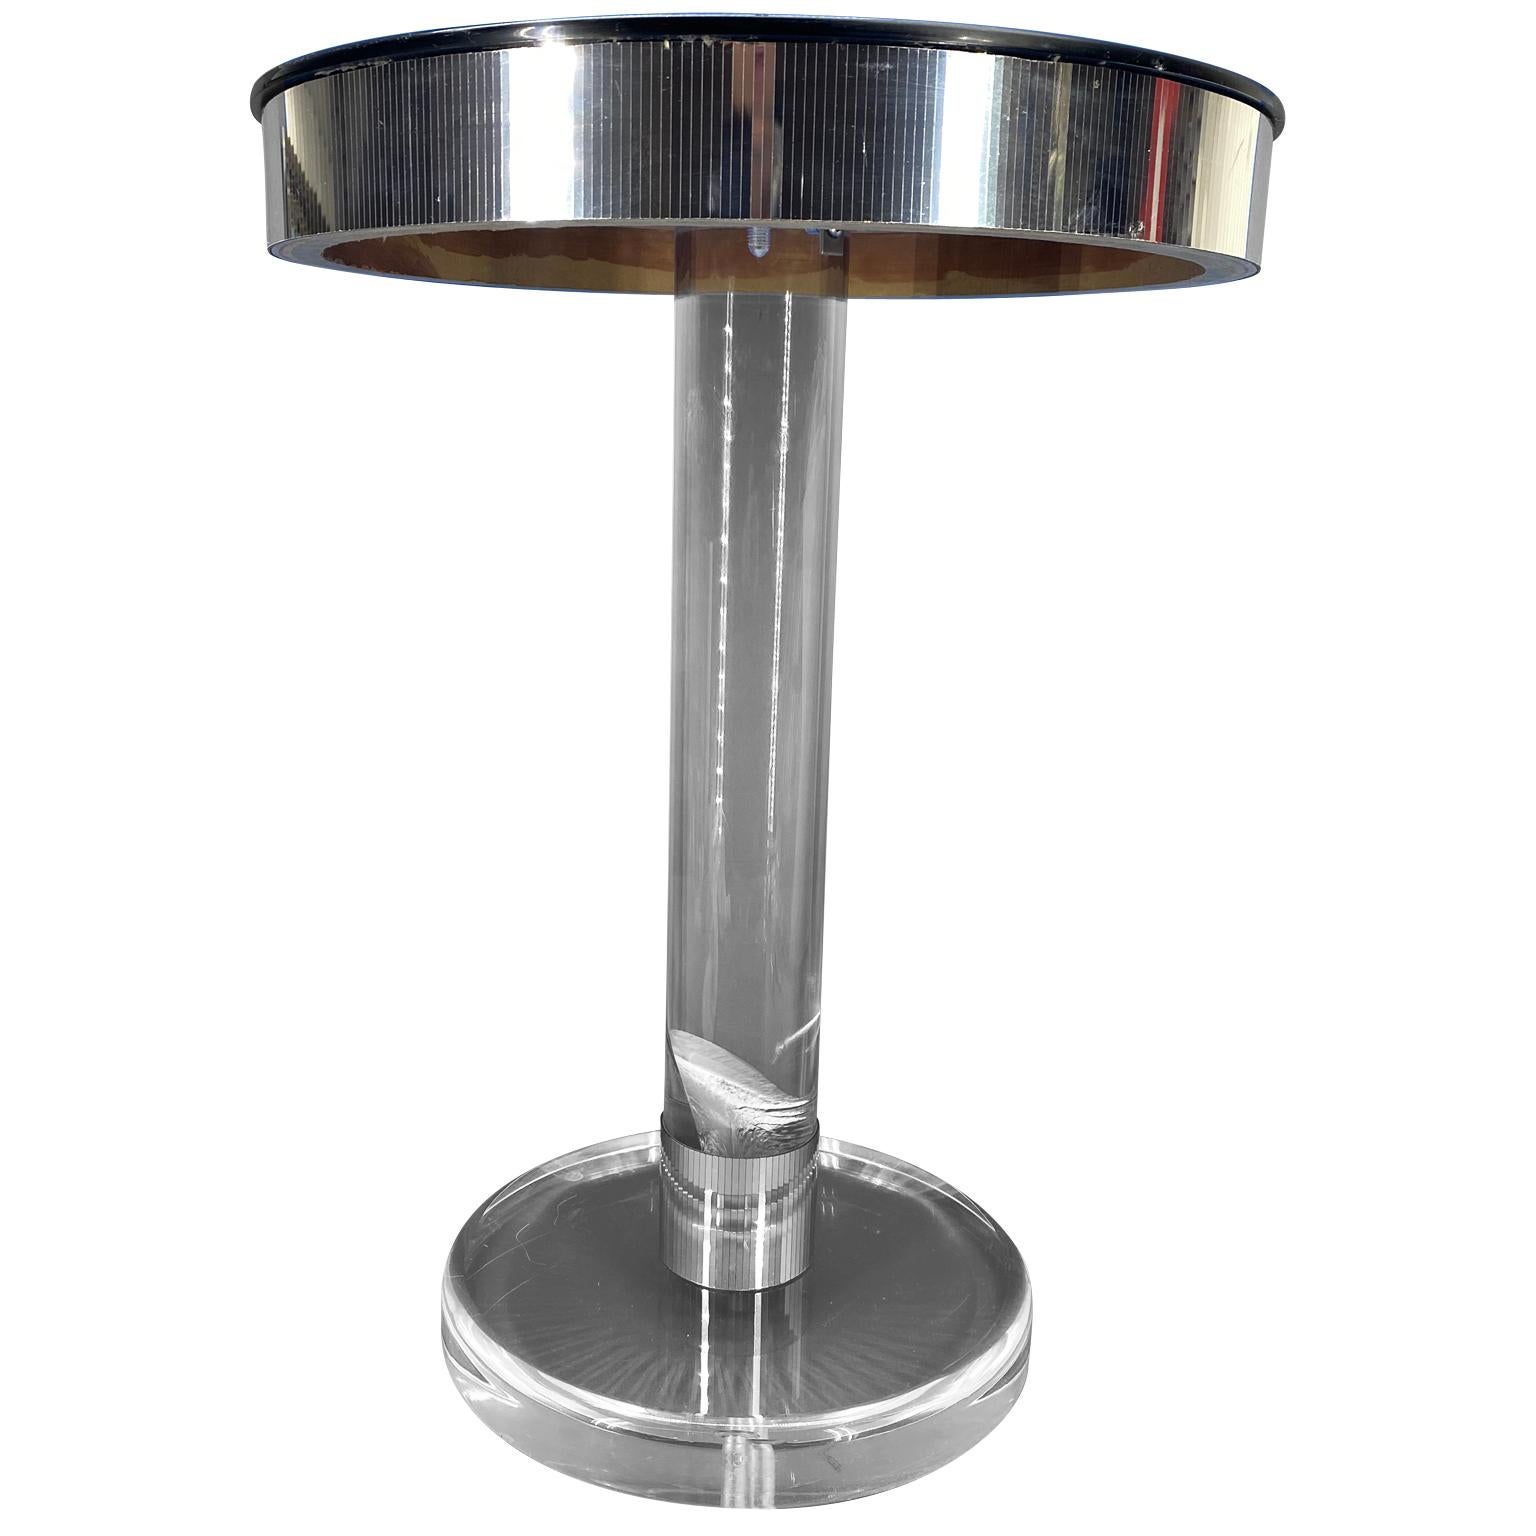 Small round midcentury Lucite side table with black glass top and with reflective chrome accents around the tabletop.



   